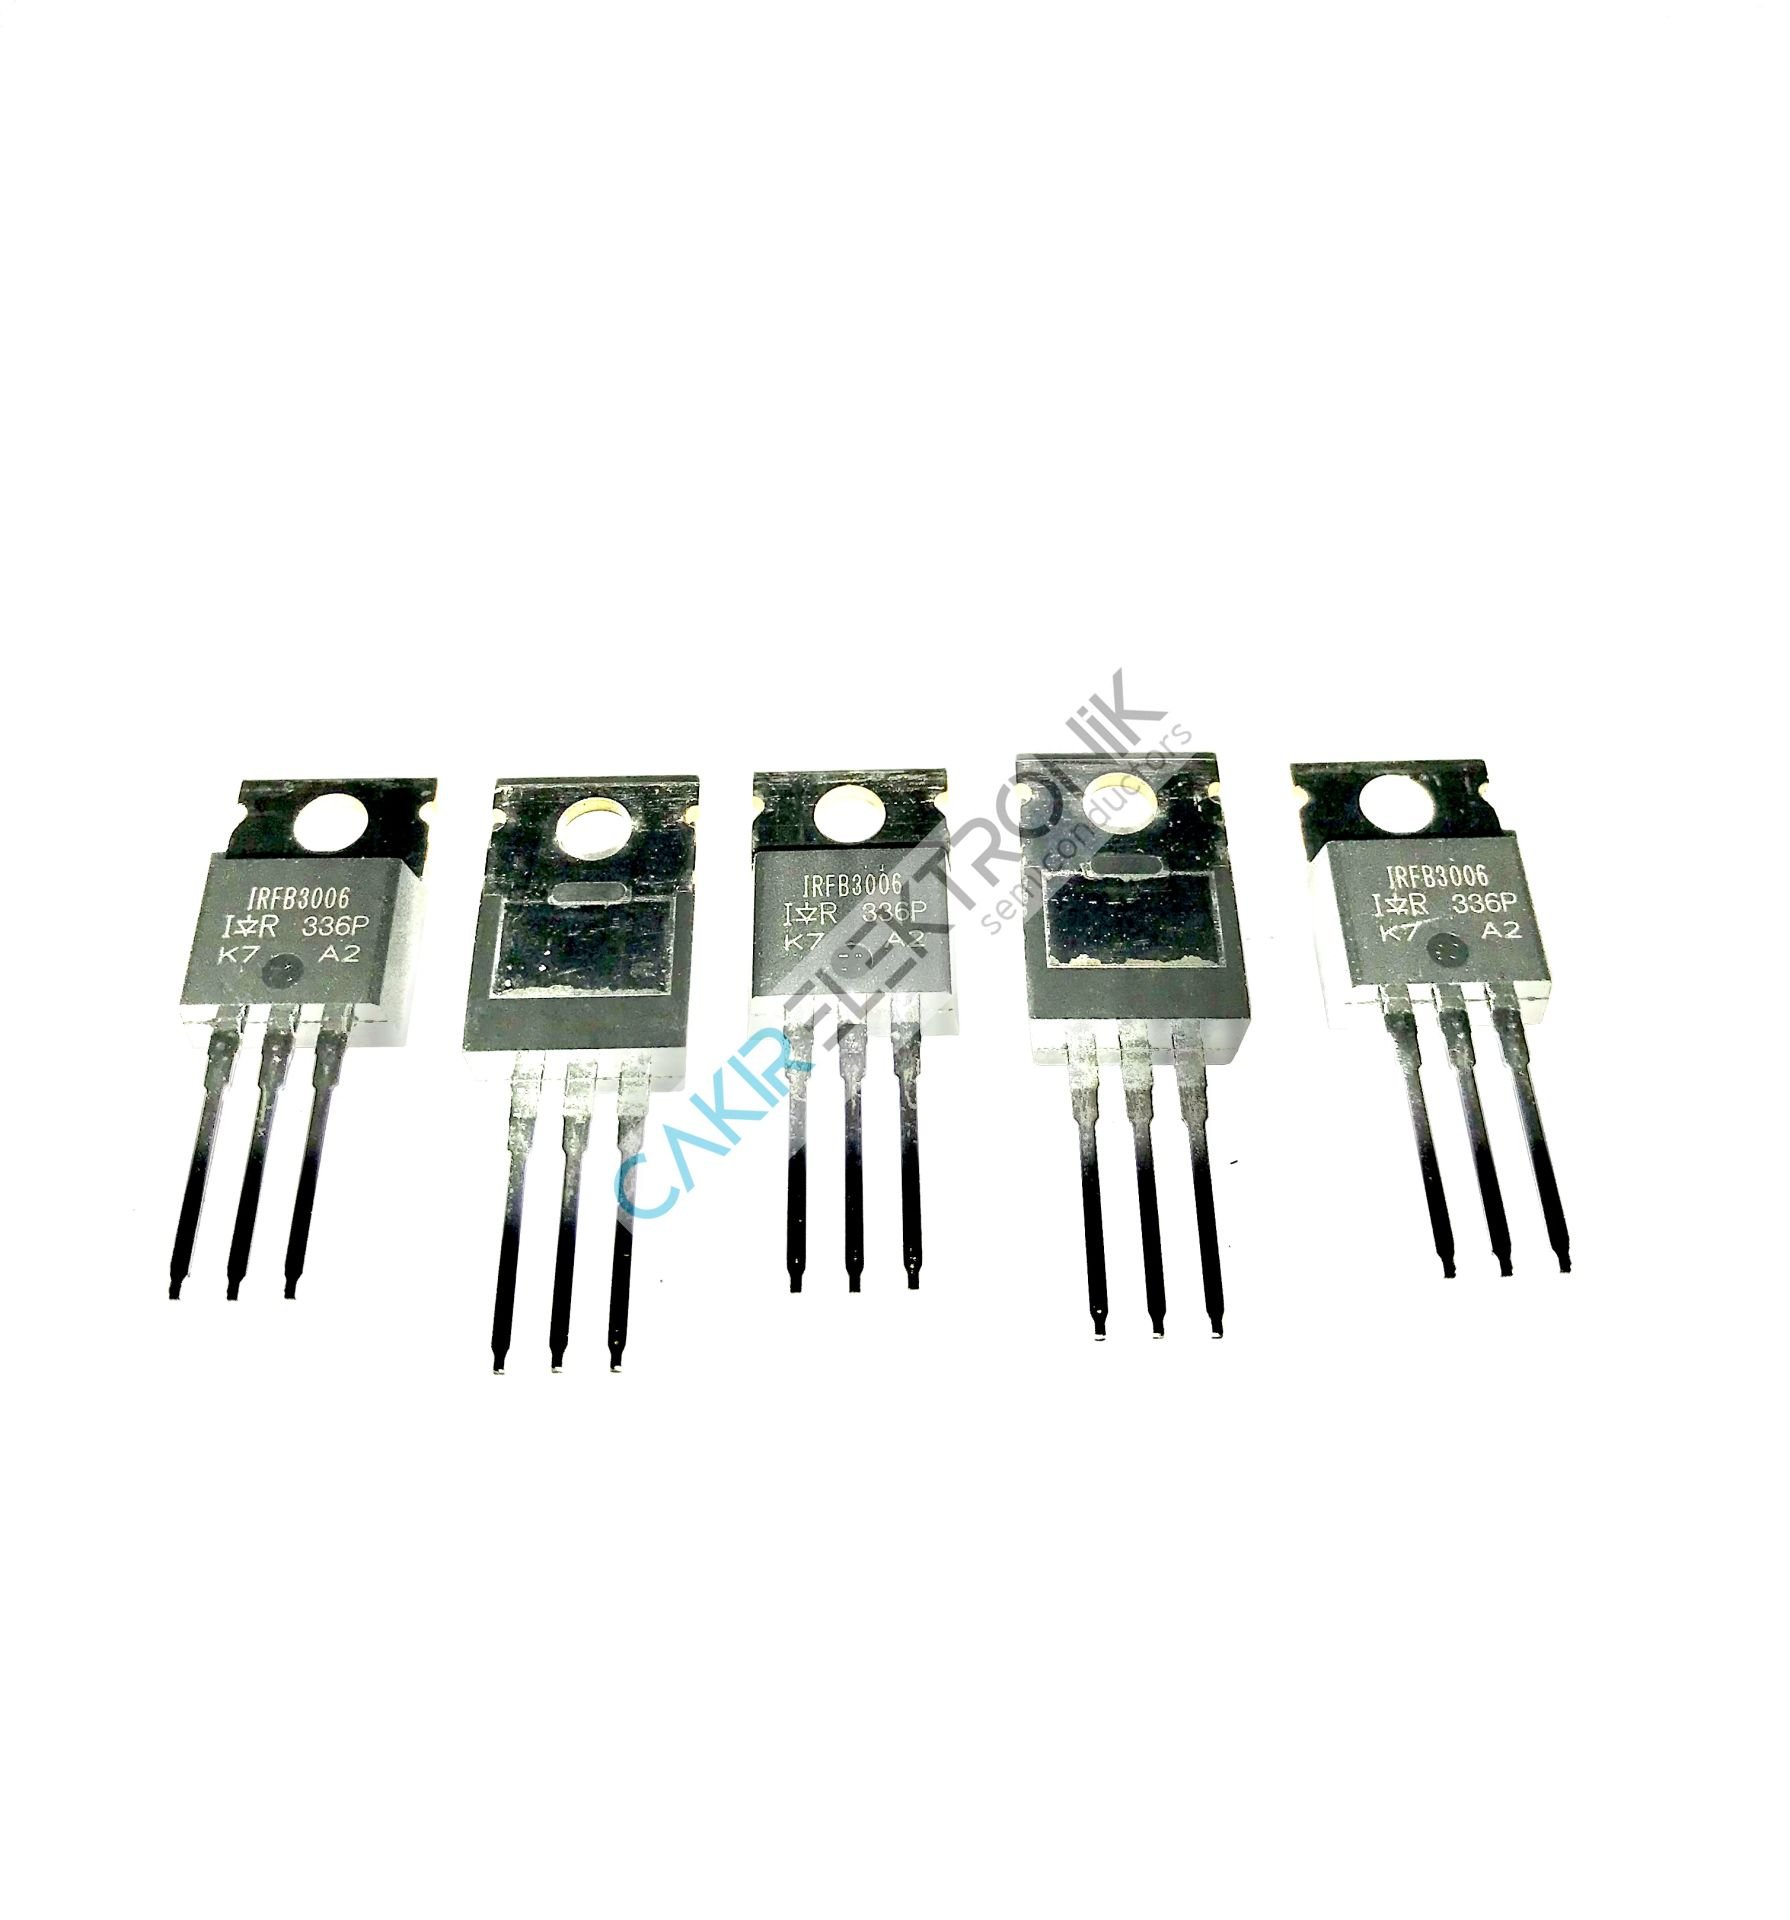 IRFB3006 -  60V. 195A. N KANAL MOSFET